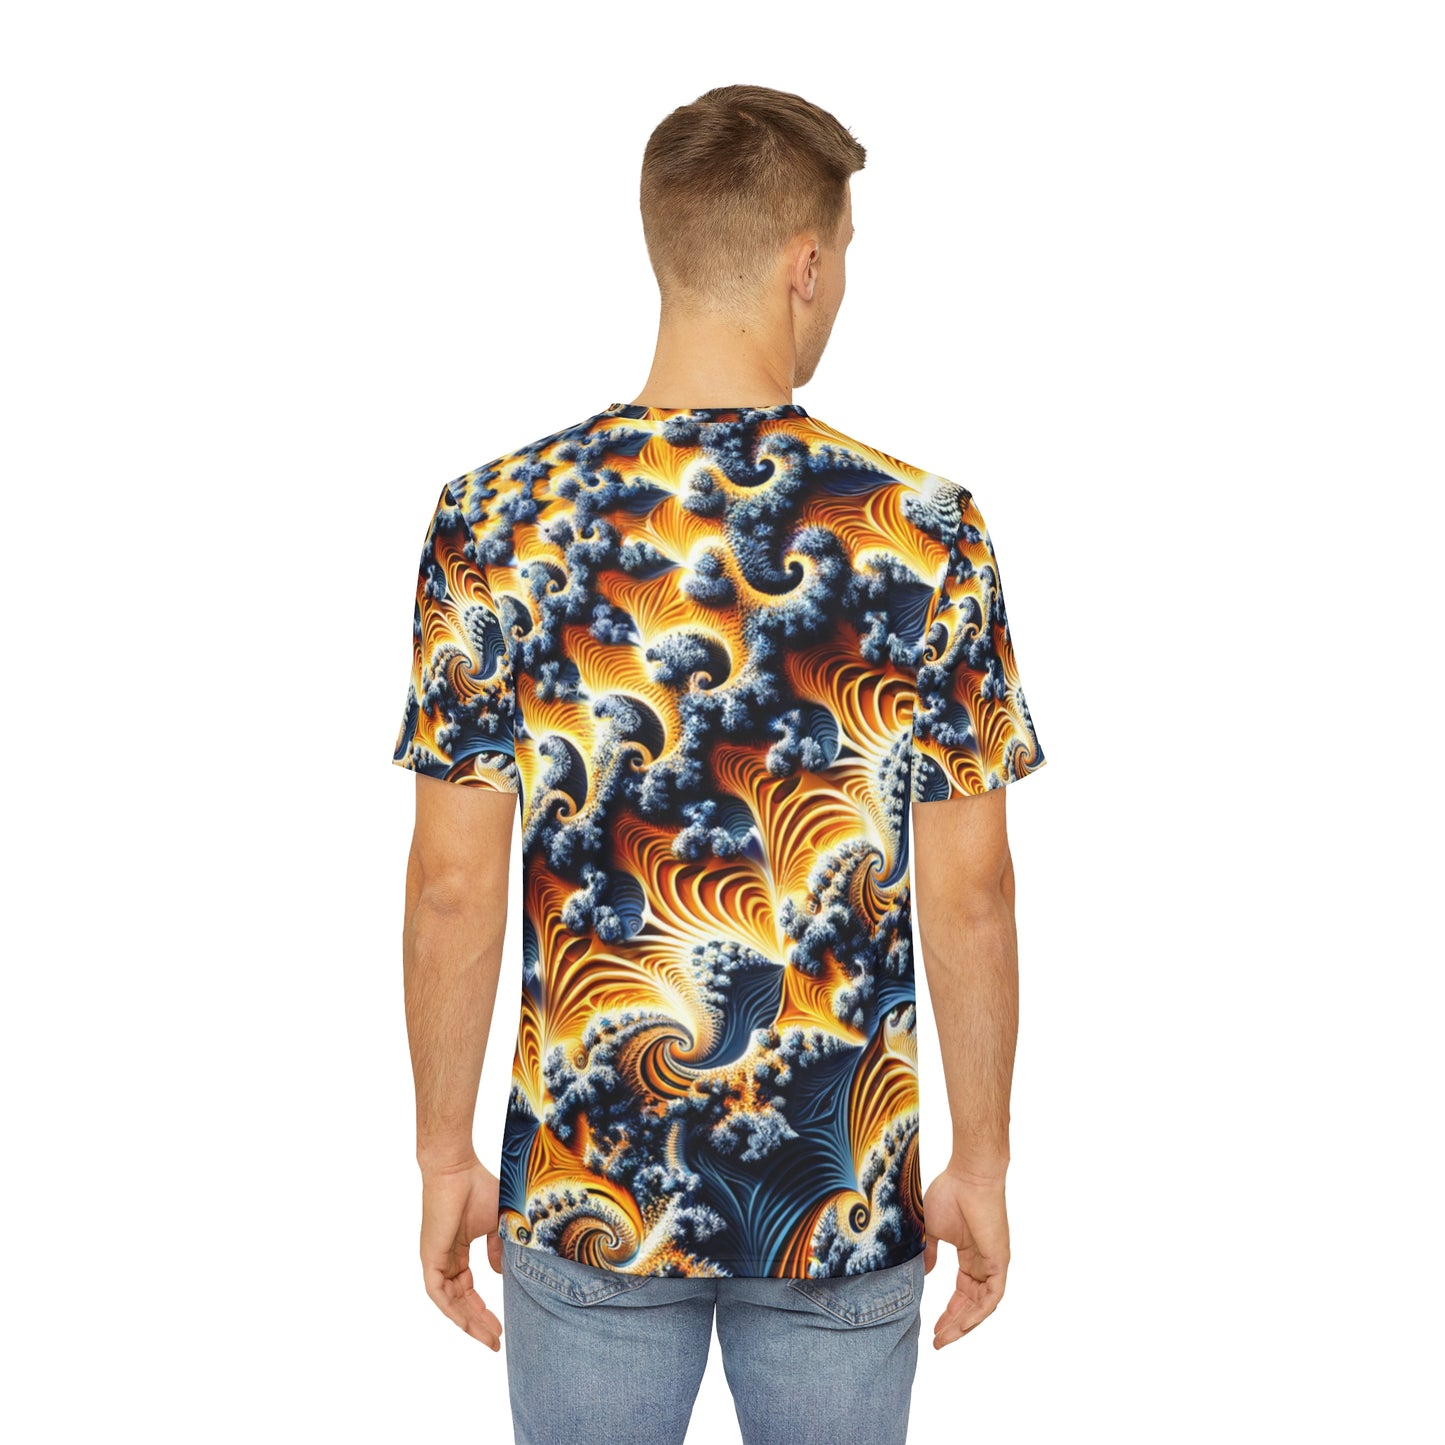 Back view of the Celestial Spirals & Waves Crewneck Pullover All-Over Print Short-Sleeved Shirt yellow blue black white orange celestial pattern paired with casual denim pants worn by a white man